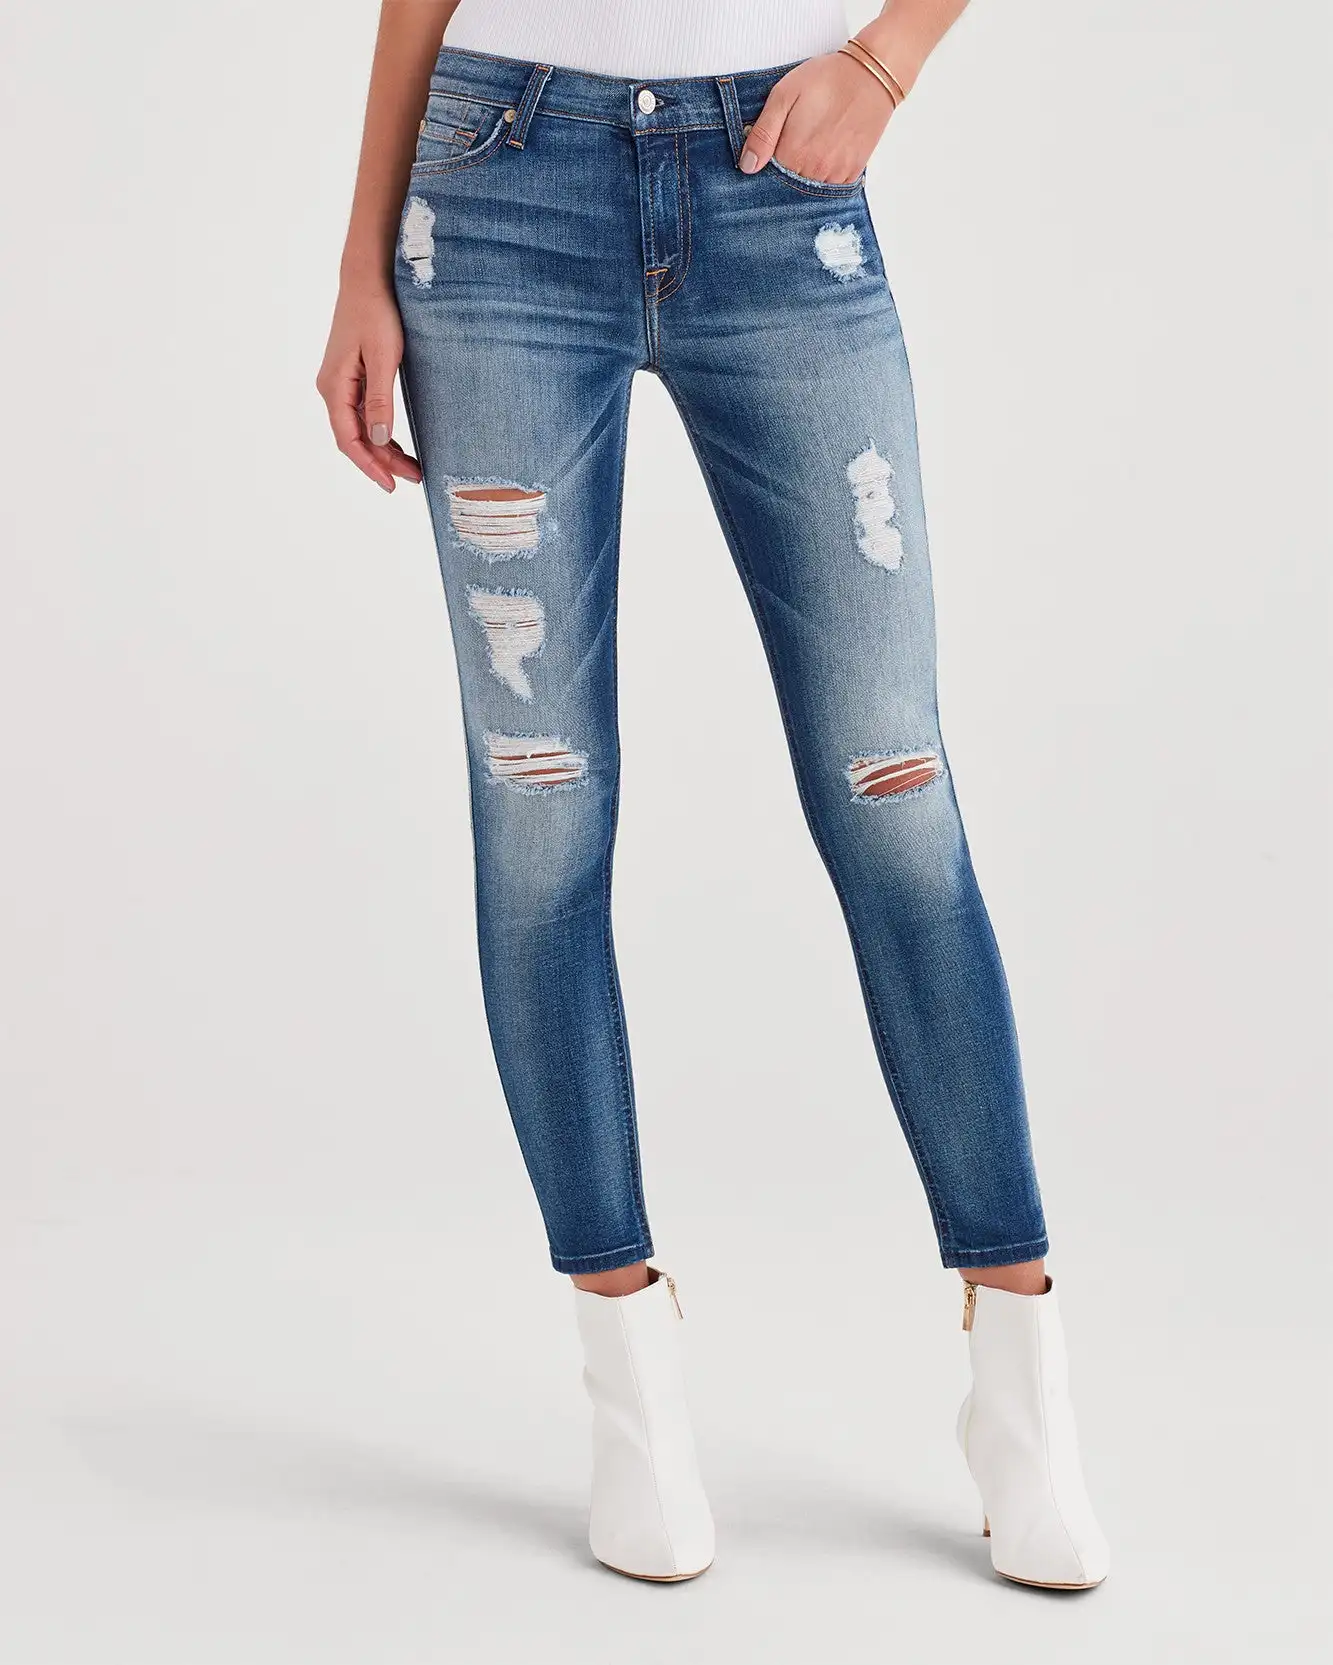 jeans for women brands